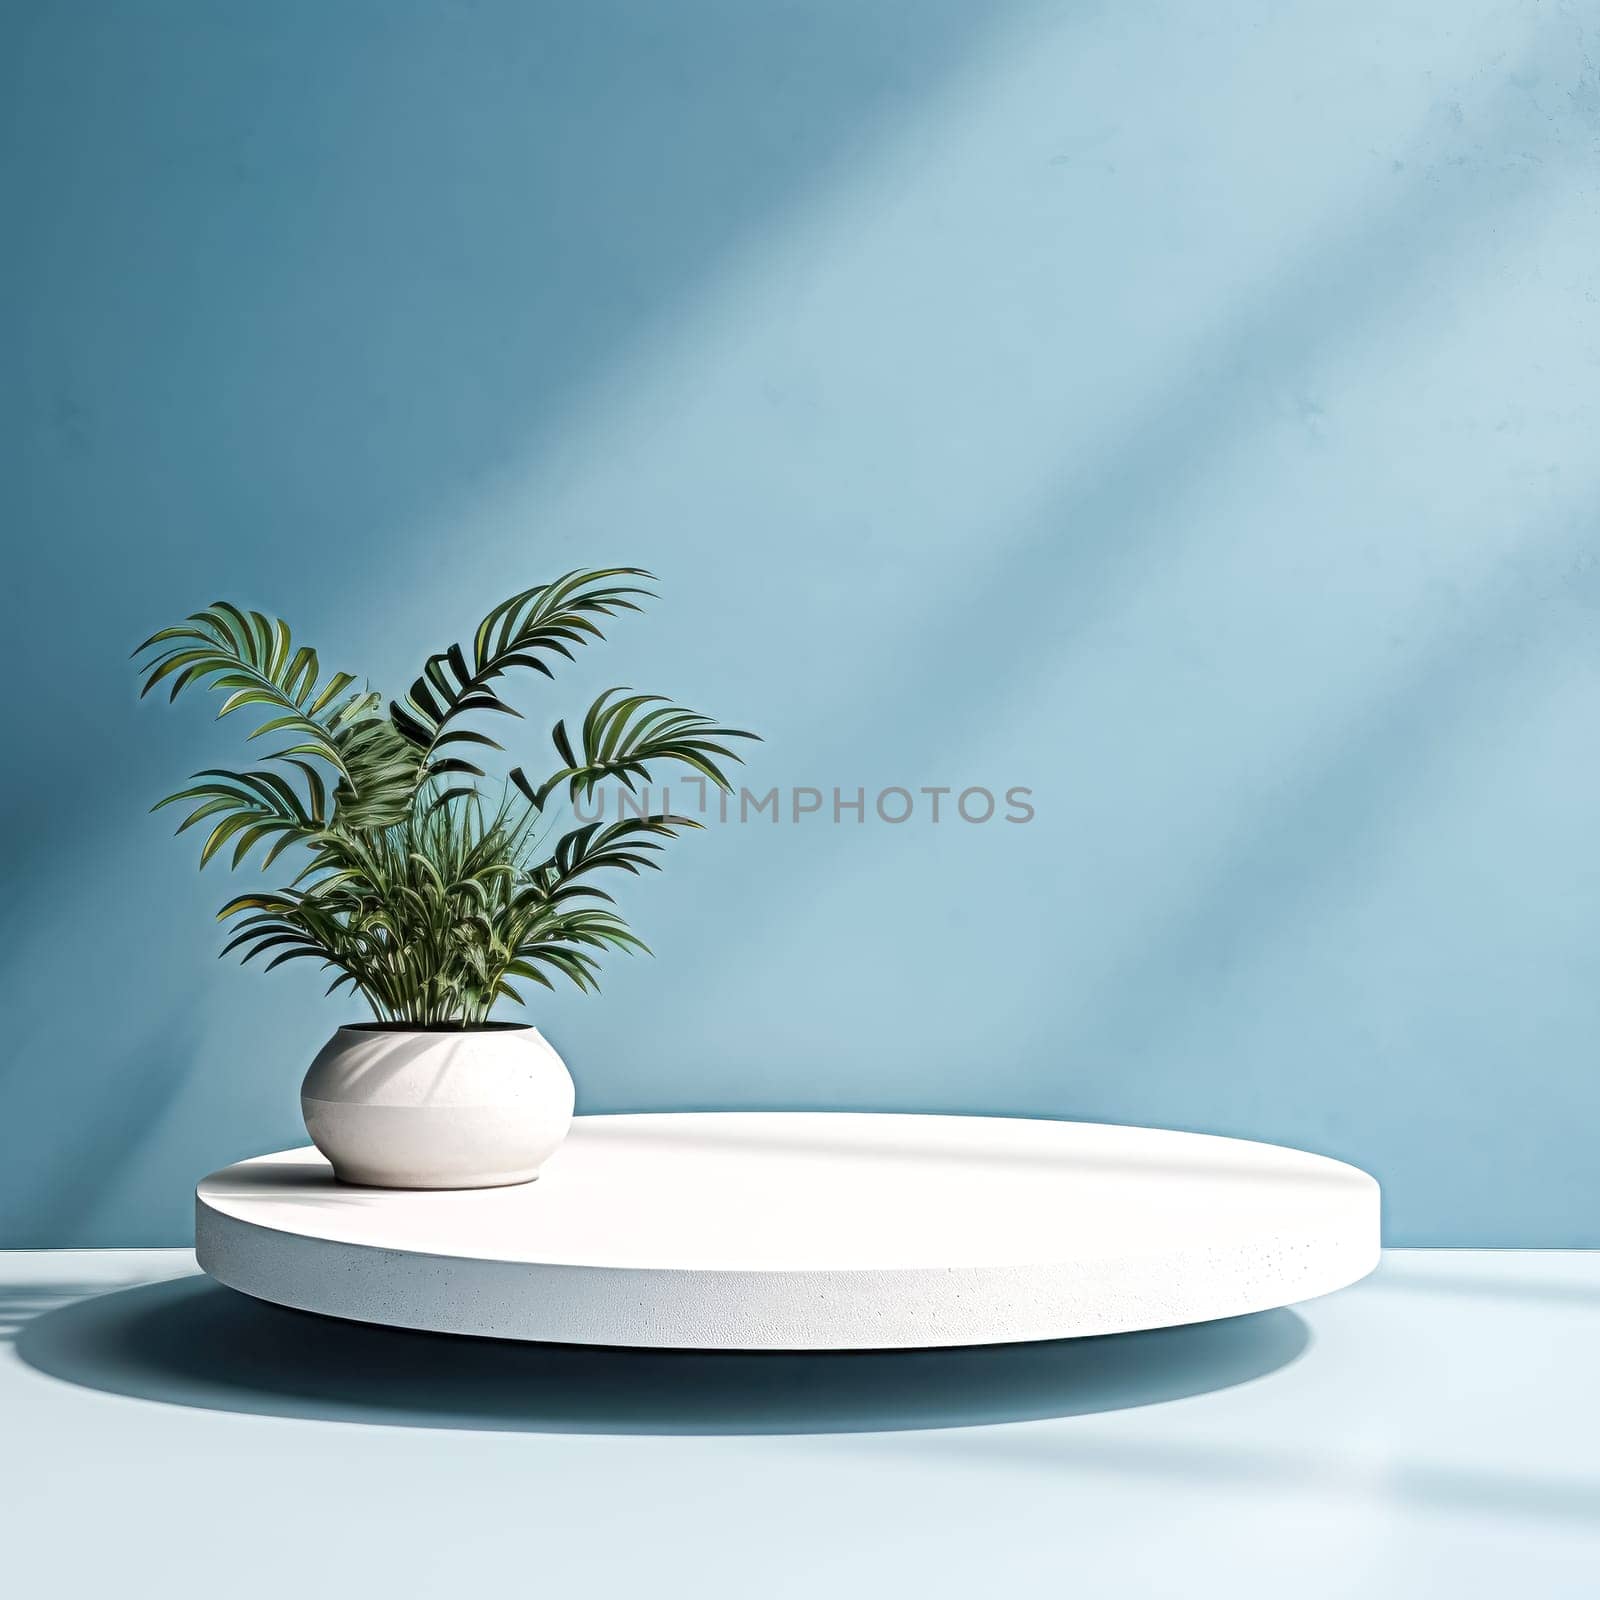 A white vase with a plant in it sits on a white pedestal. The pedestal is round and made of concrete. The scene is set against a blue wall